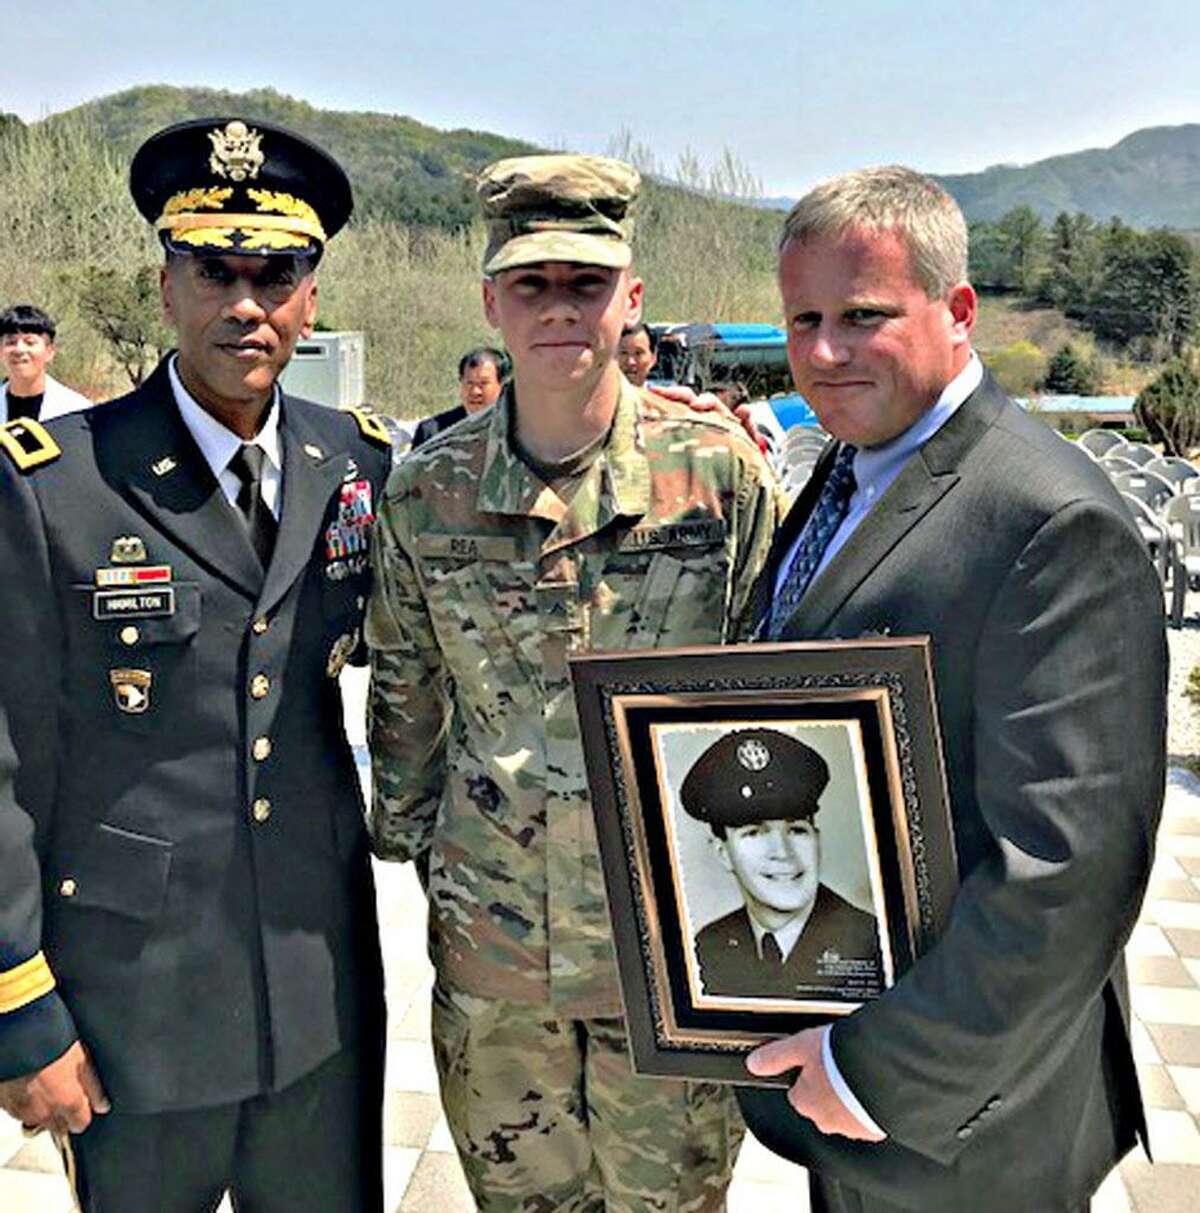 From left are U.S. Army General Hamilton, Brendan Rae and minister of patriots and veterans affairs.